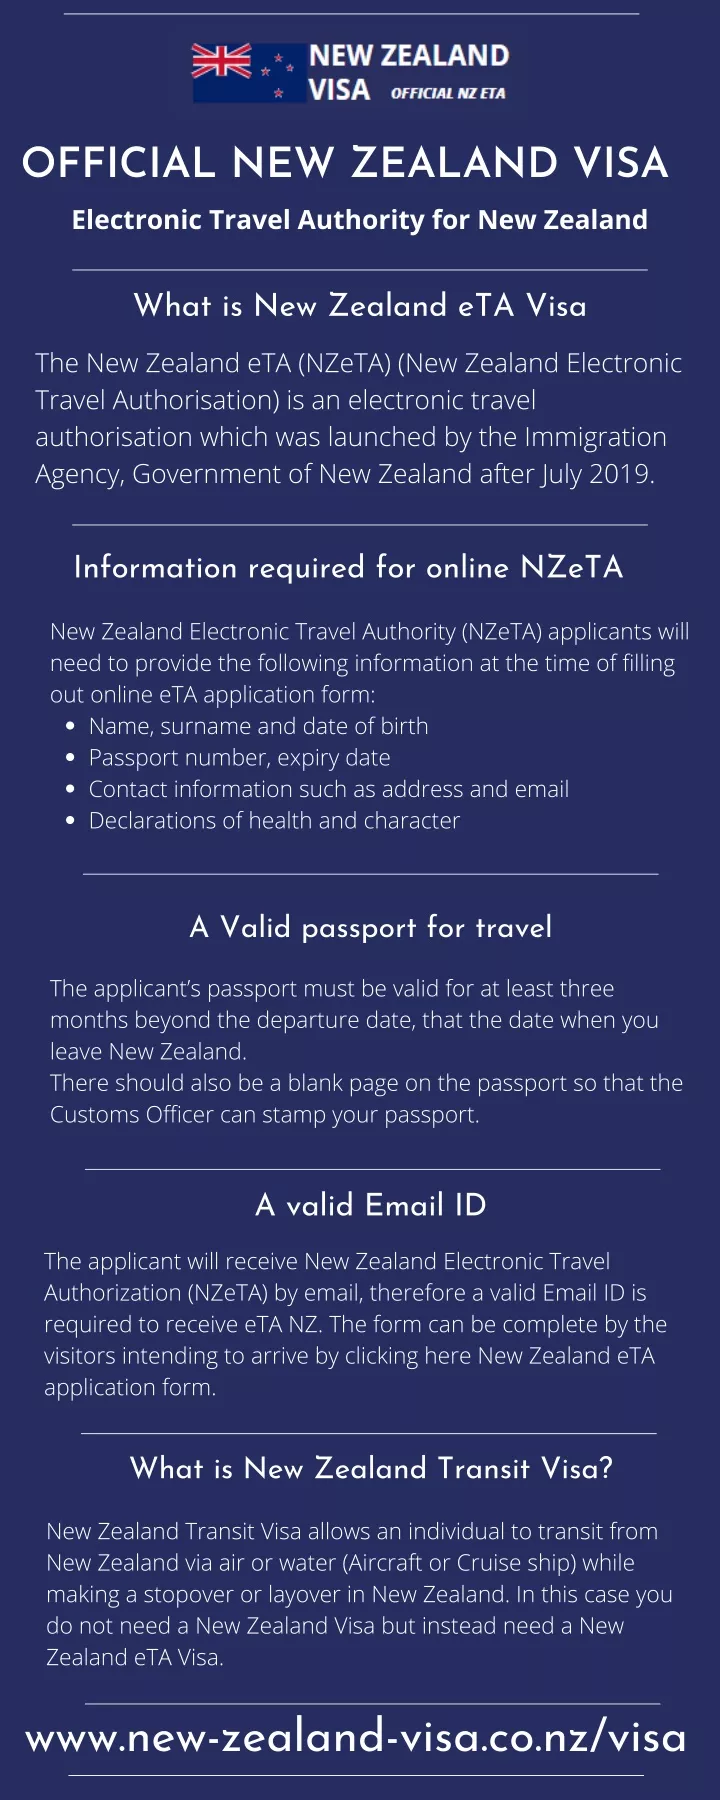 Ppt Official New Zealand Visa Nzeta Electronic Travel Authority For New Zealand Powerpoint 3362